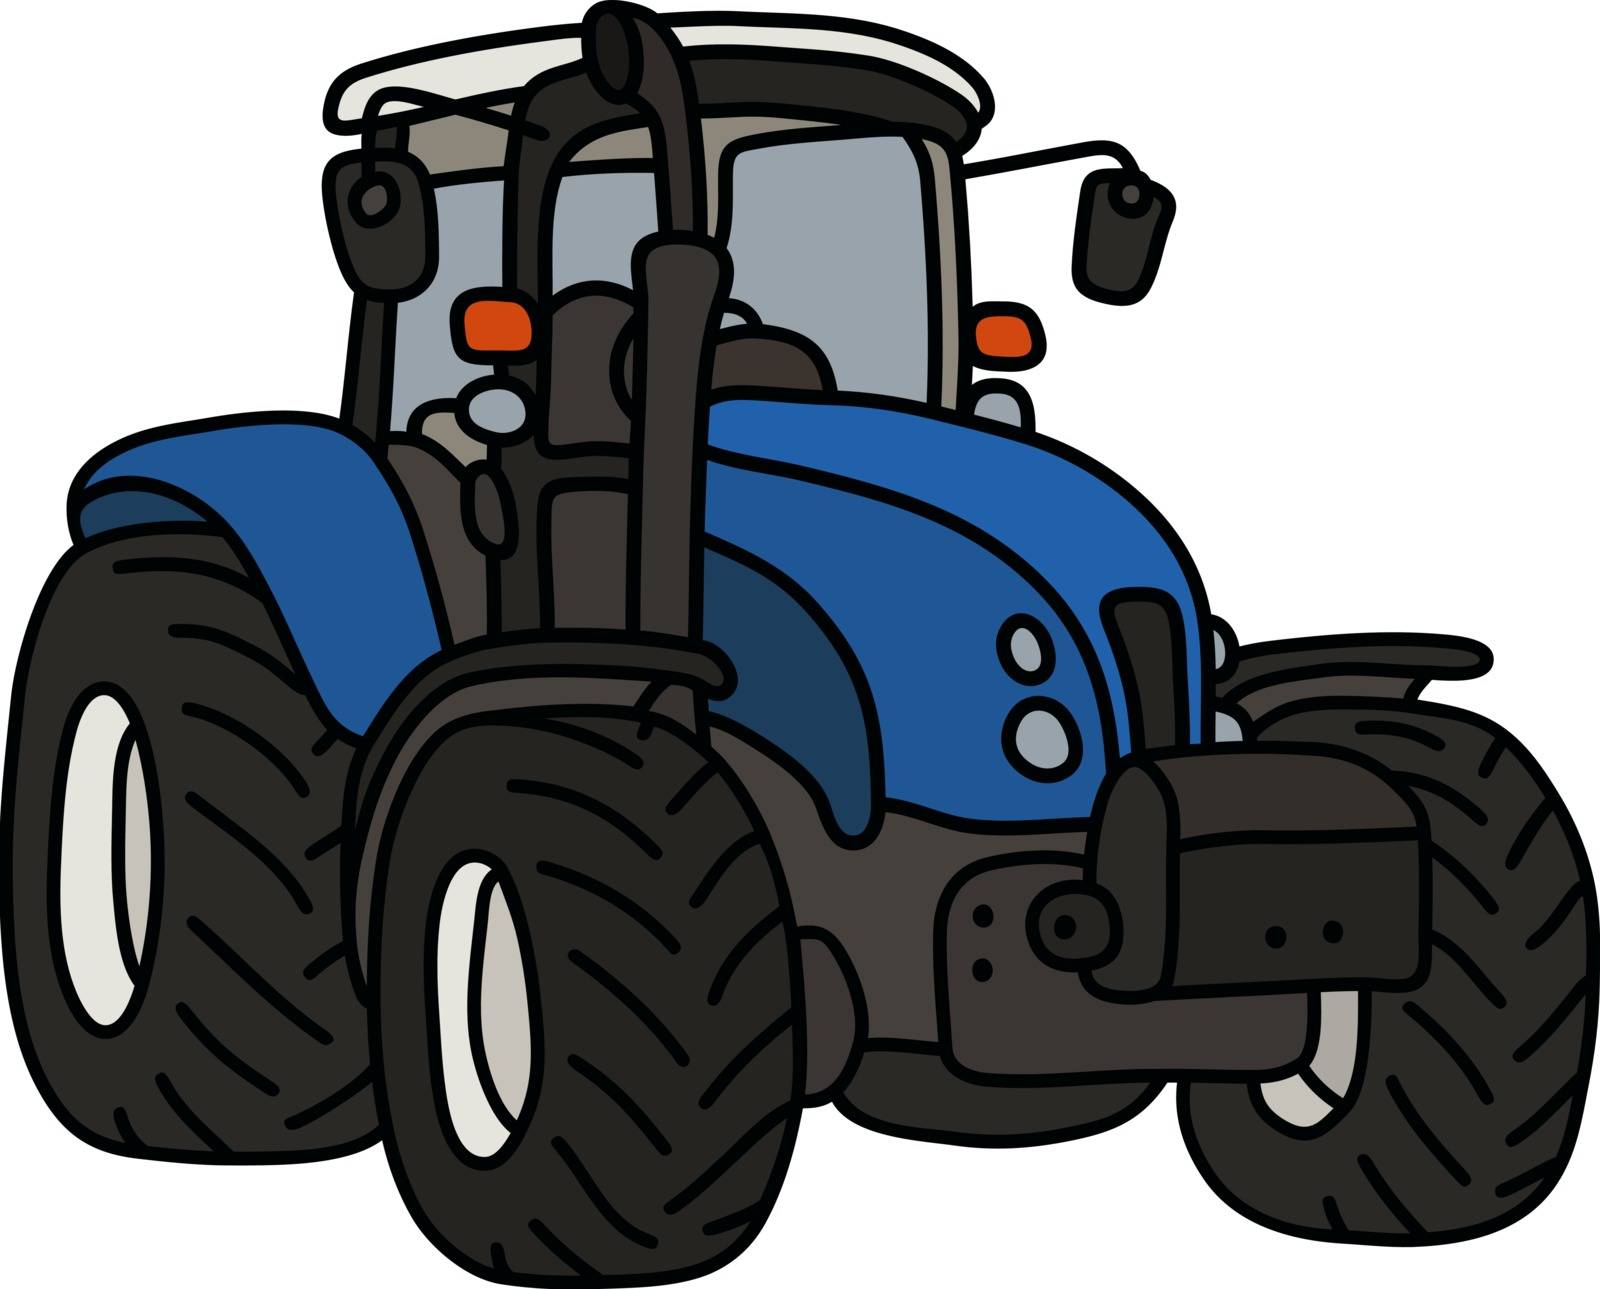 The hand drawing of a blue heavy tractor